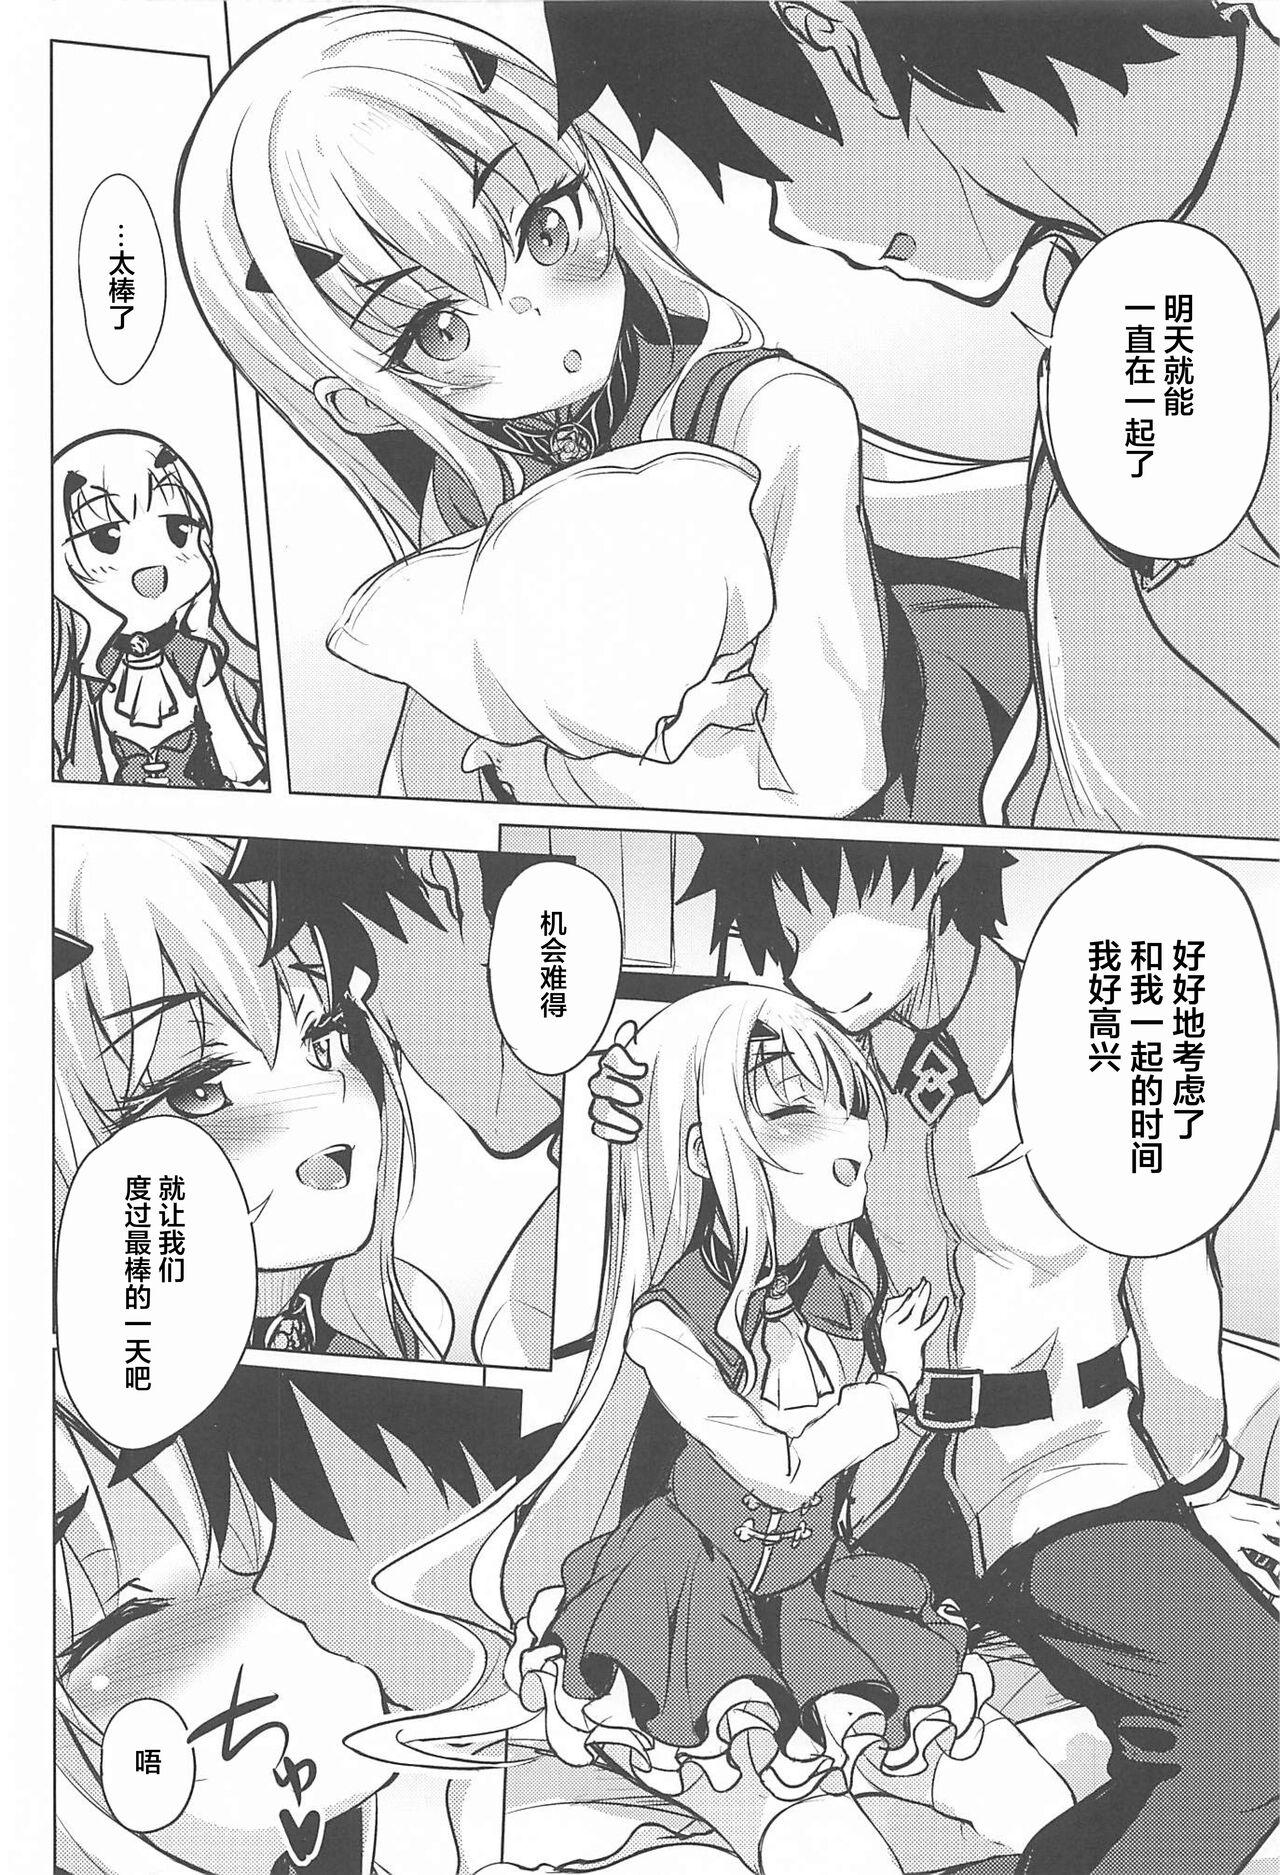 Bigcocks 休暇日和のメリュジーヌ - Fate grand order Cuckolding - Page 4